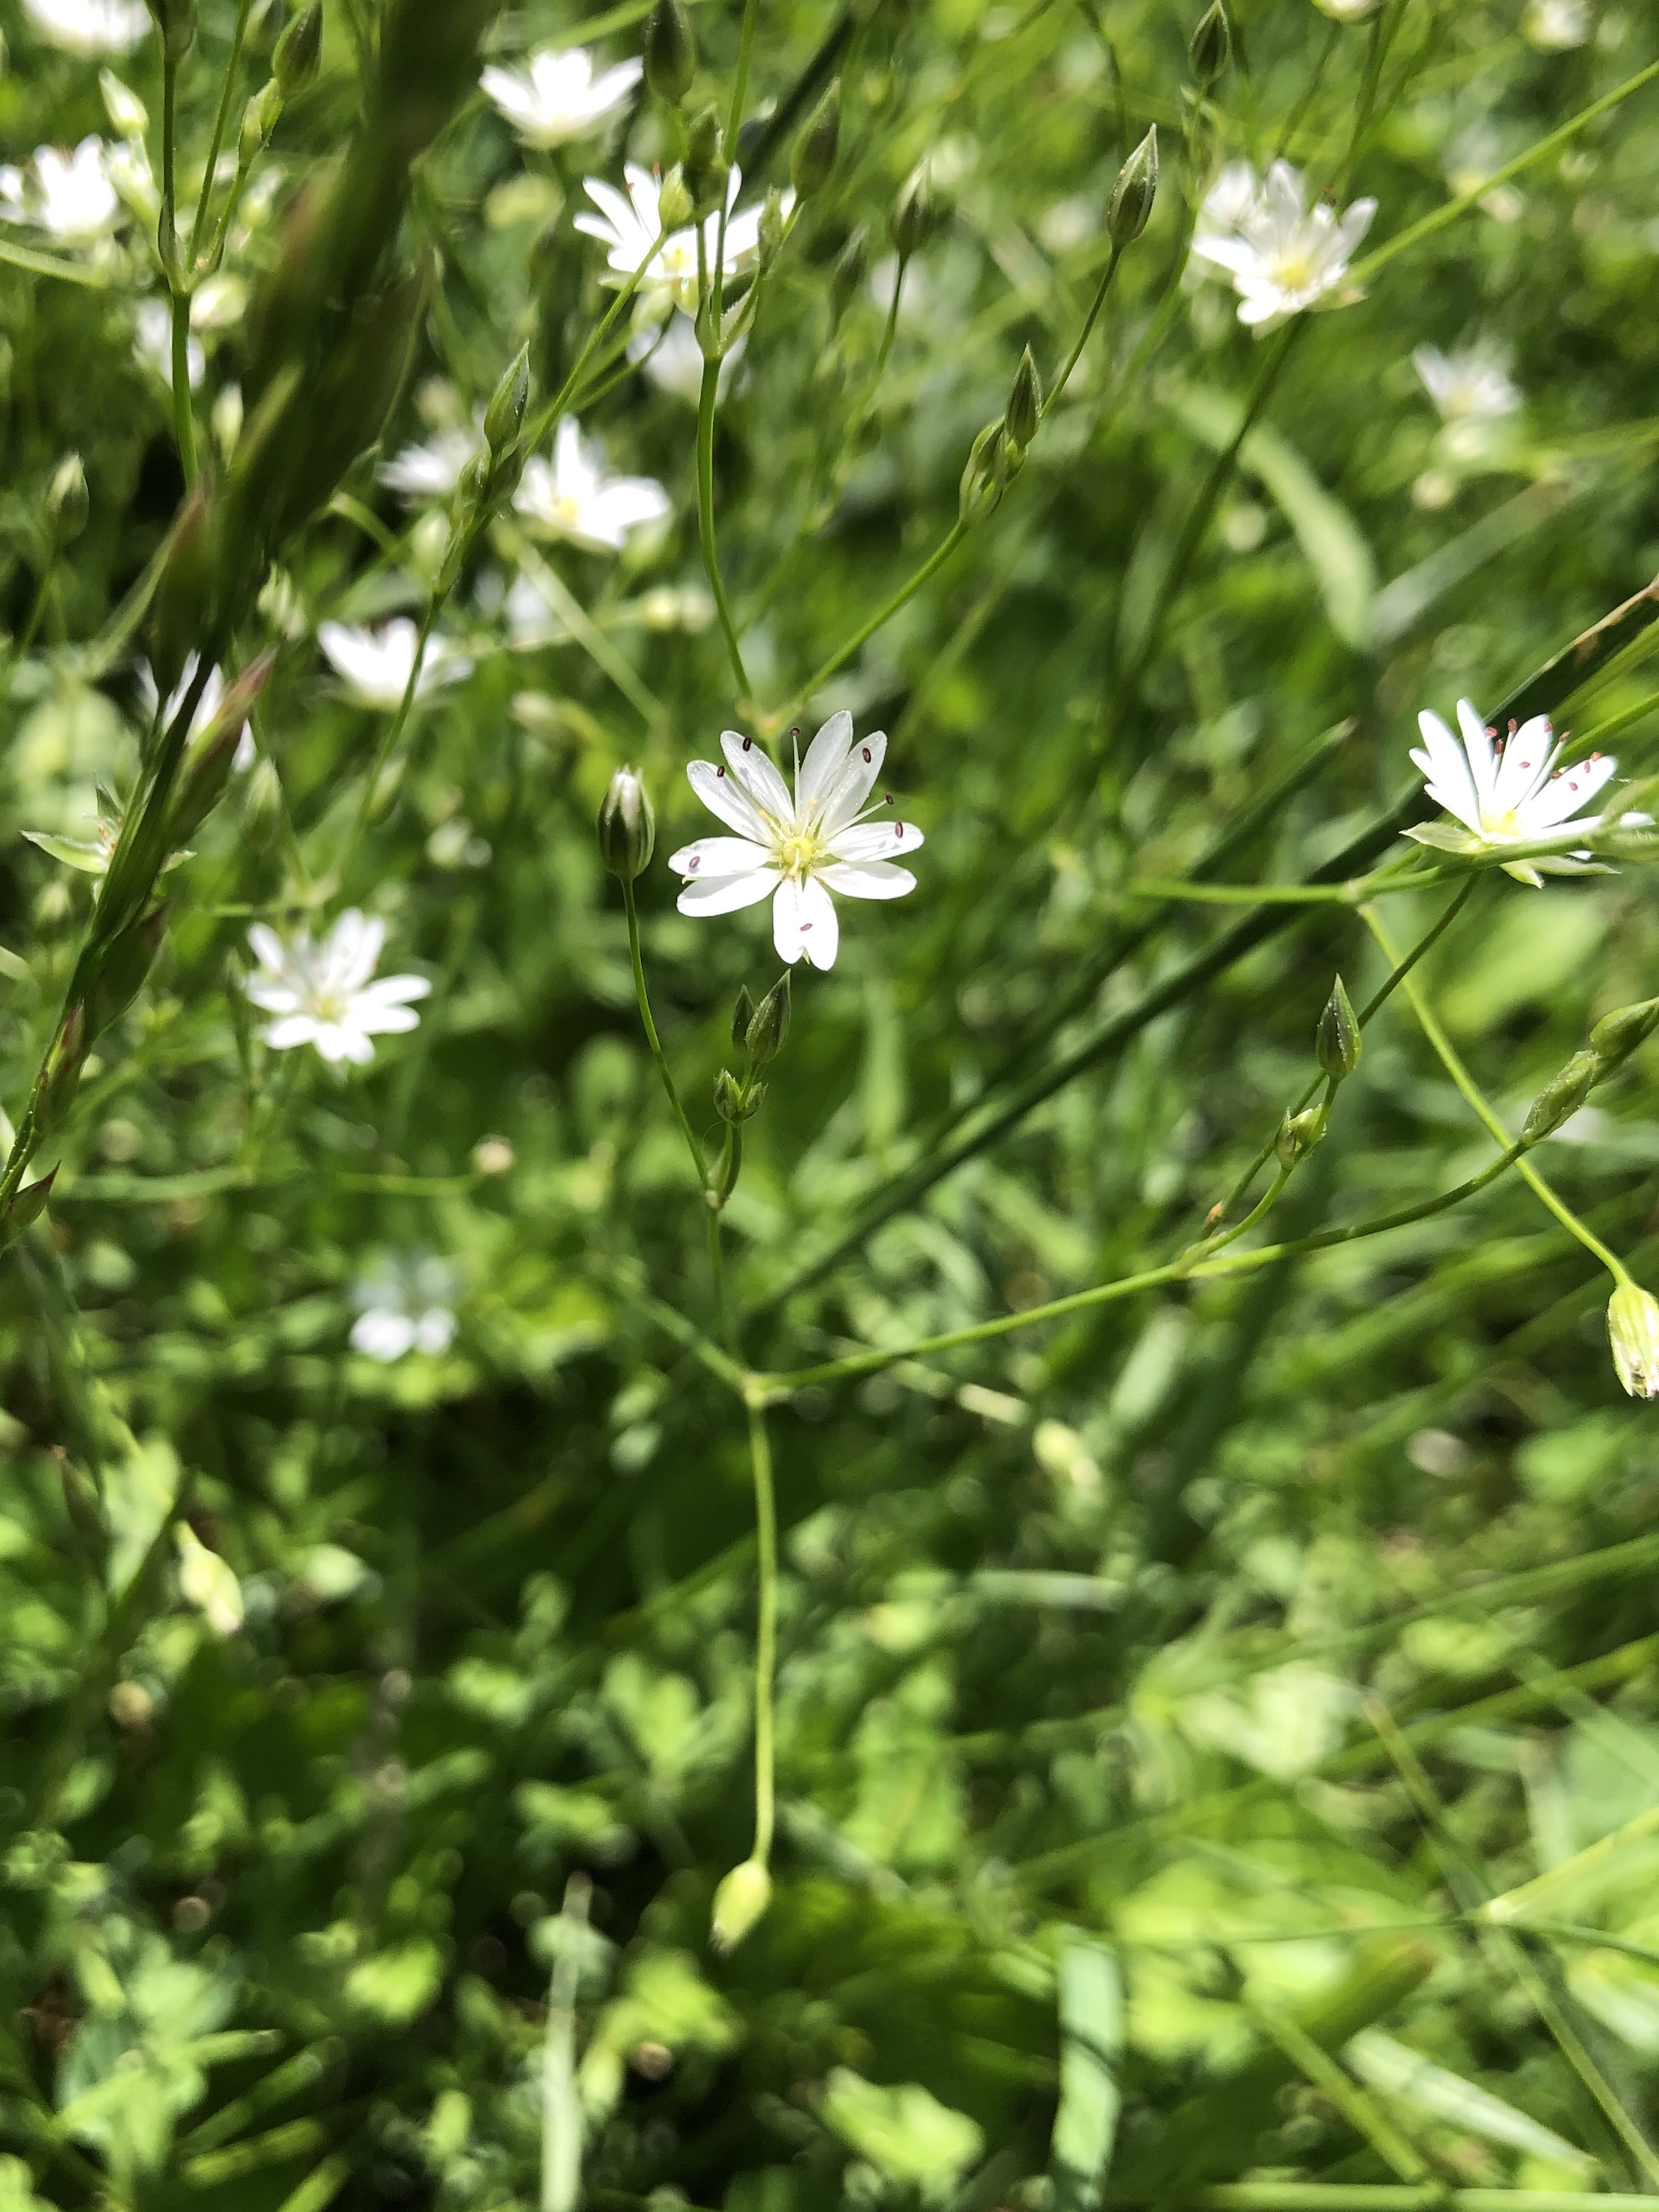 Common Stitchwort in a grassy clearing along the bike path between Odana Road and Midvale Boulevard in Madison, Wisconsin on June 3, 2022.